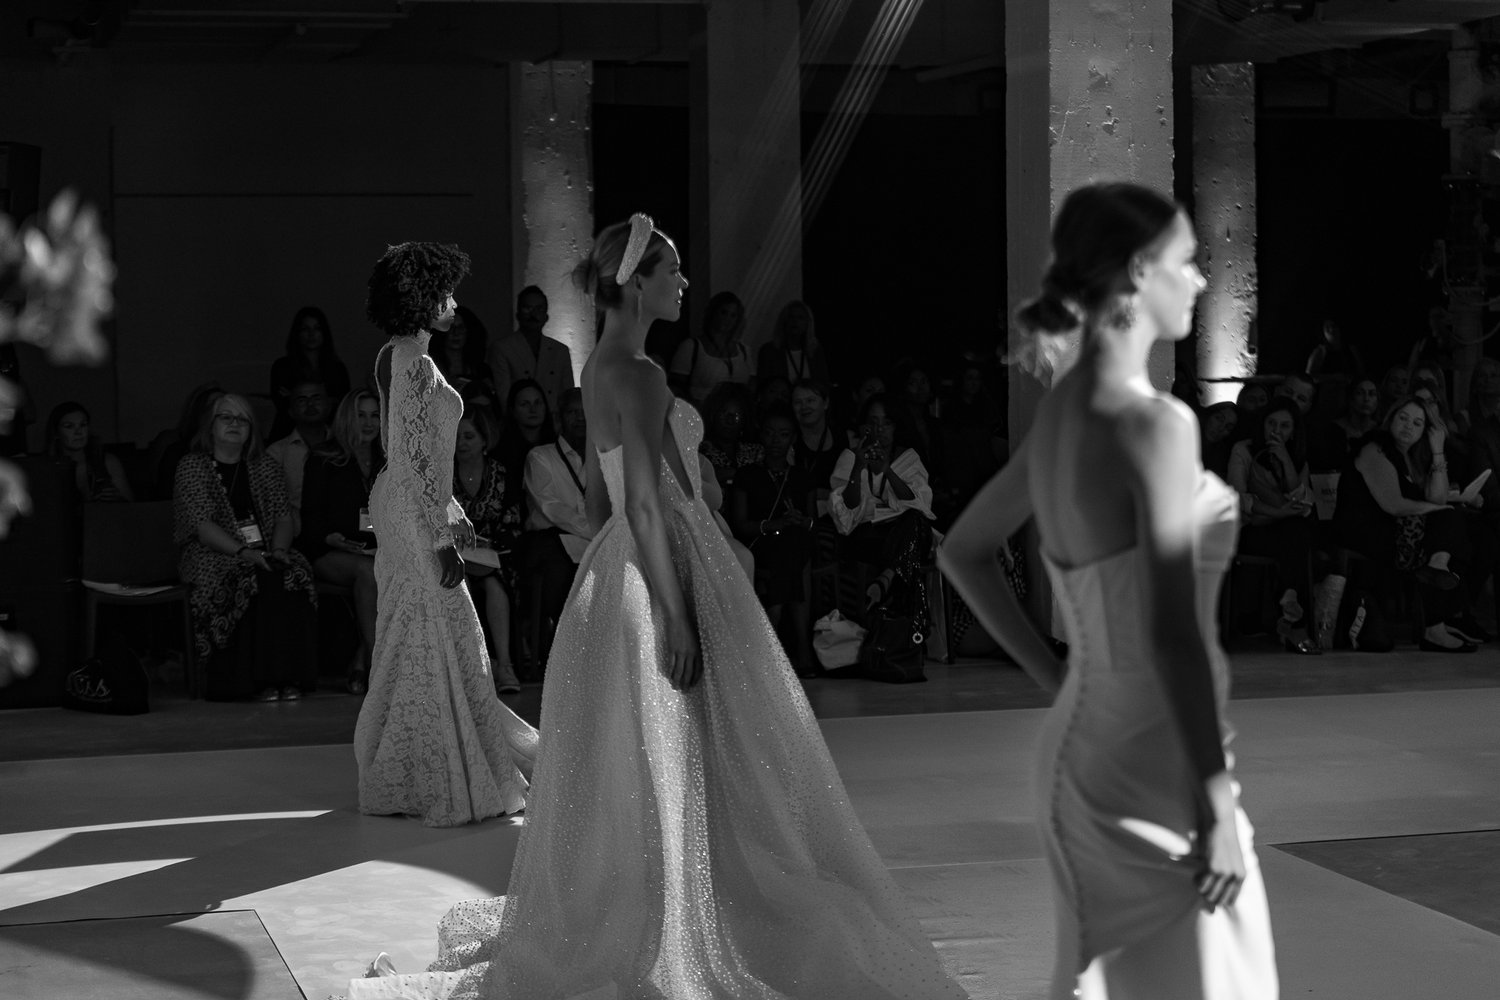 About the Show — National Bridal Market Chicago